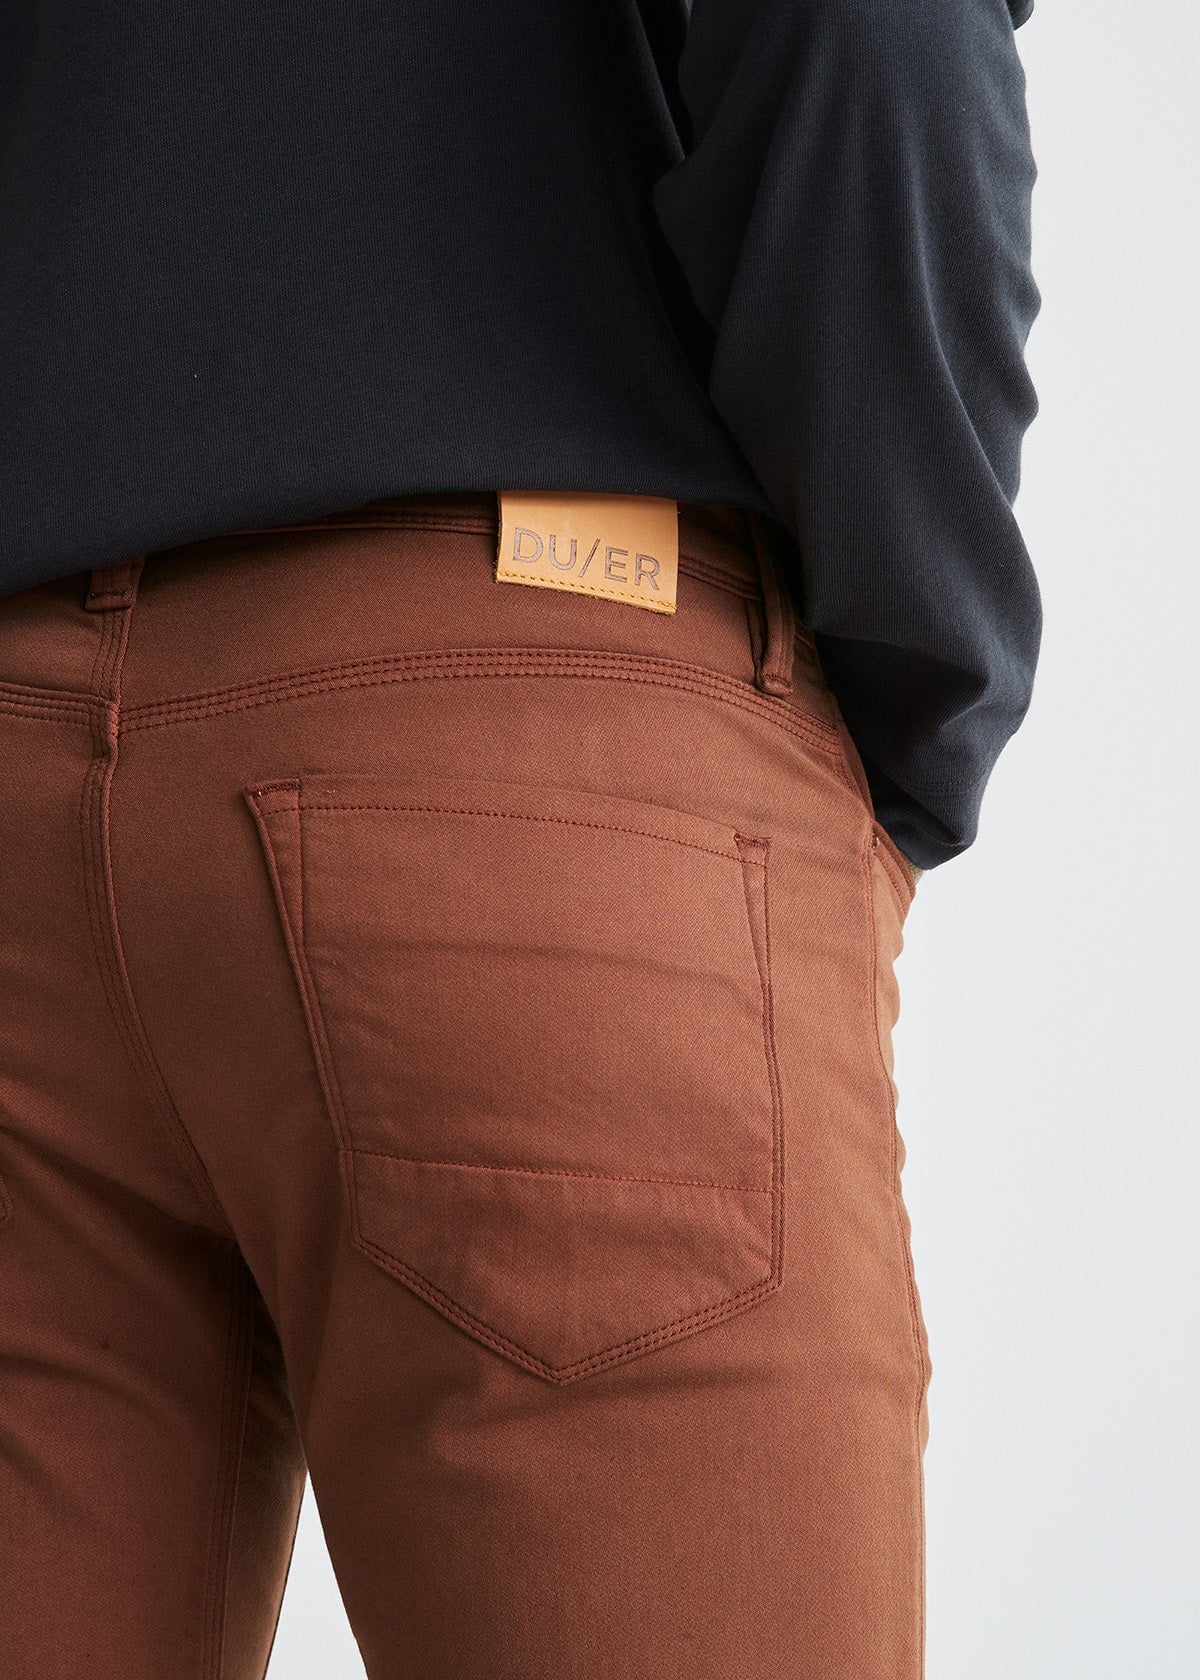 mens red-brown slim fit dress sweatpant back pocket and patch detail